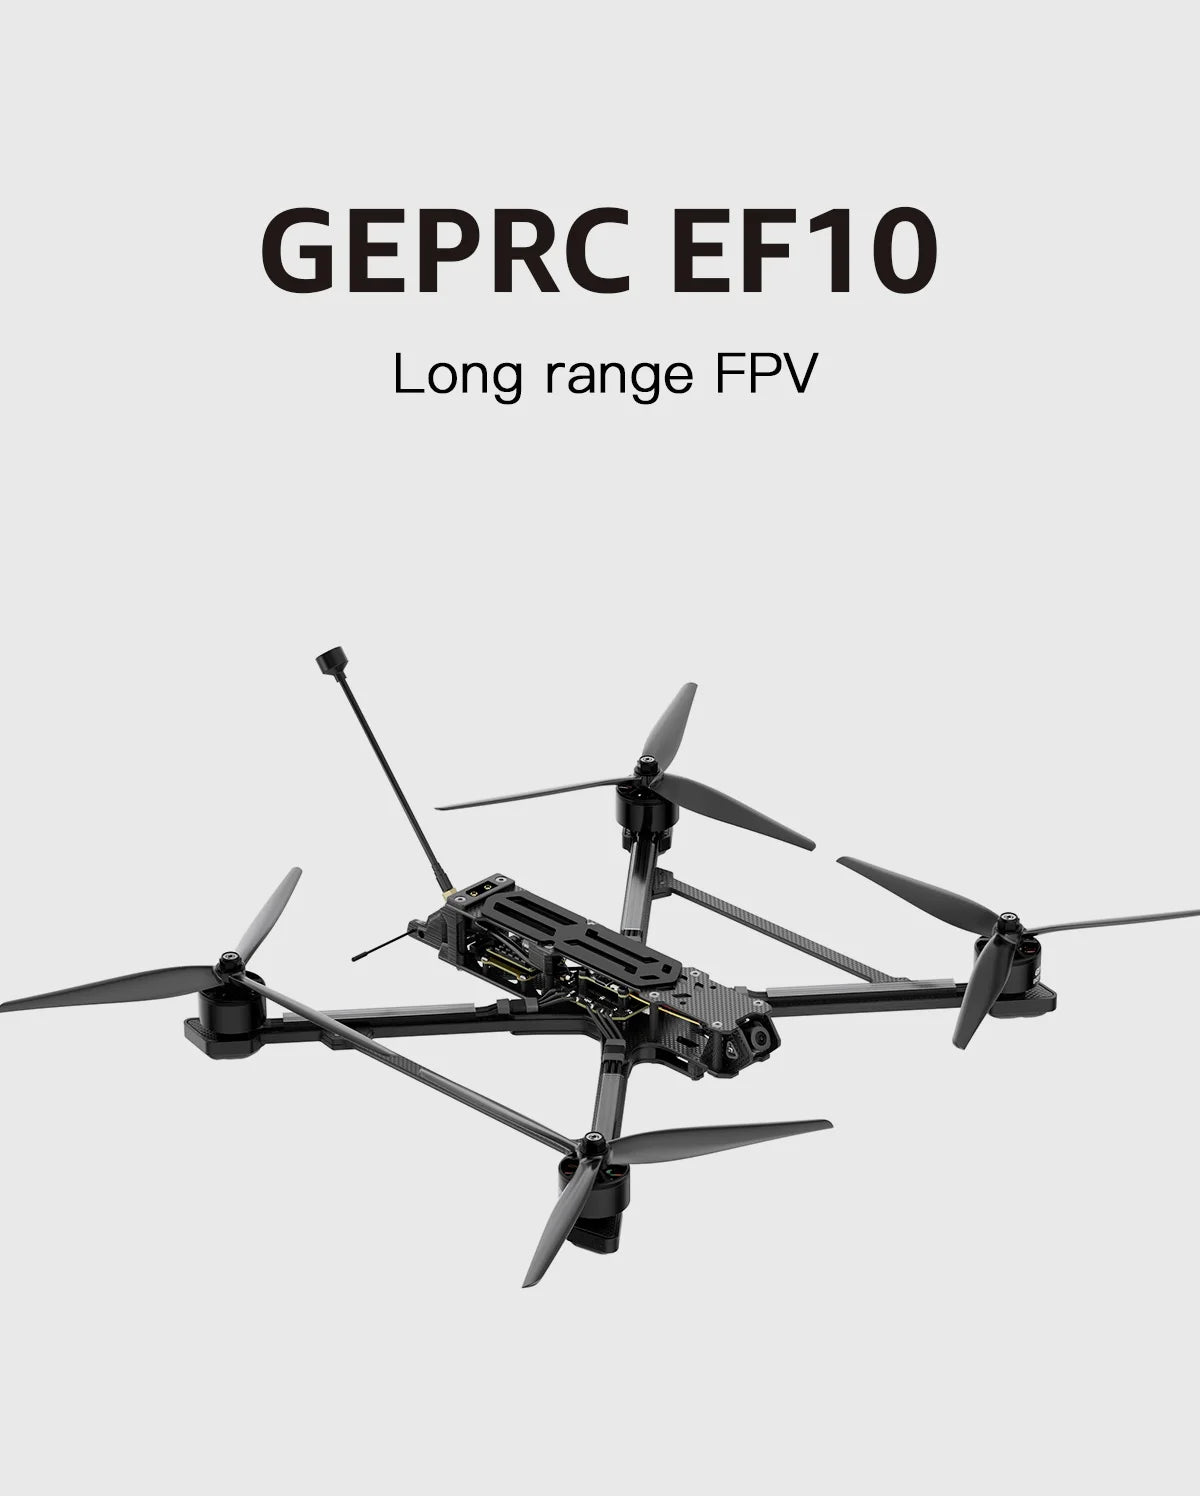 GEPRC EF10 1.2G 2W Long Range 10inch FPV, damage resulting from any non-GEPRC technical or other support(online community for example